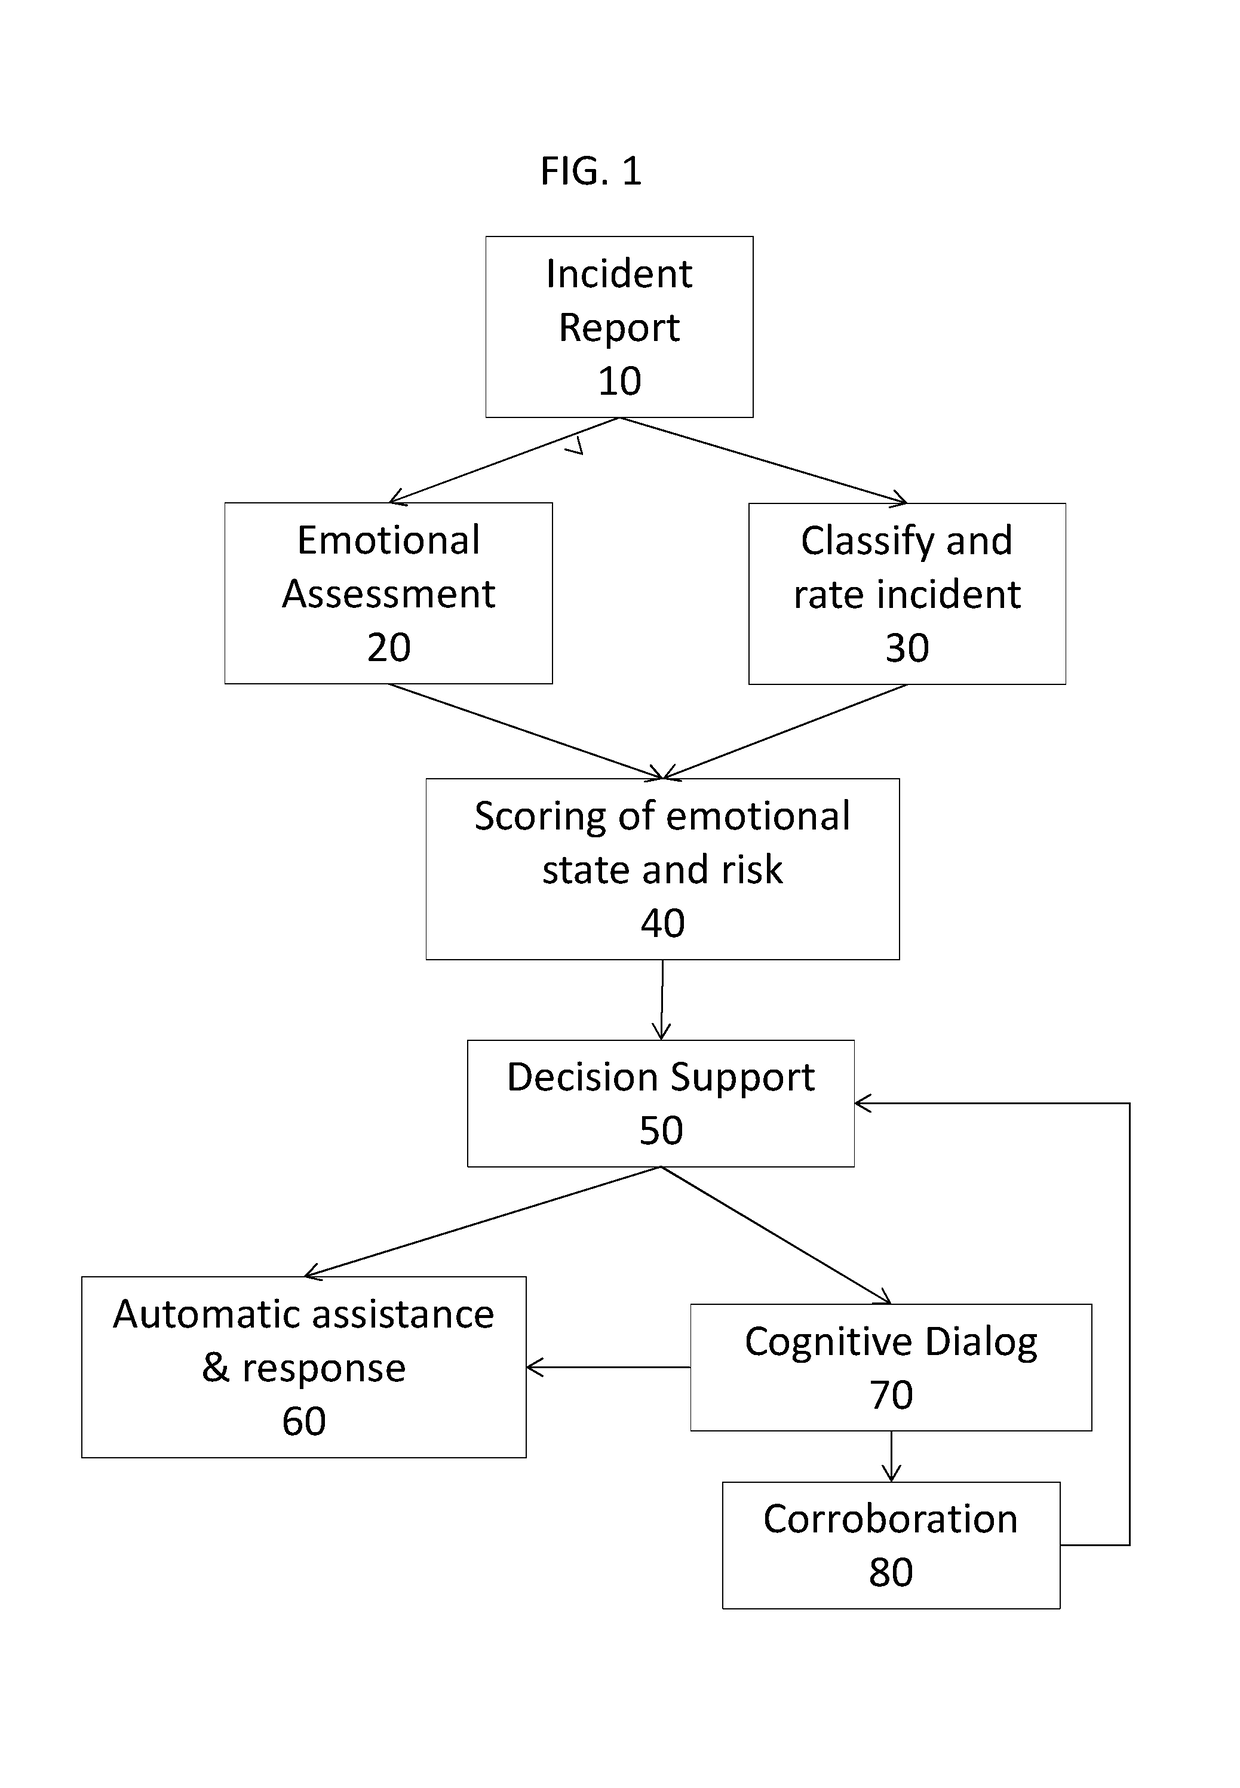 Personalized Situation Awareness Using Human Emotions and Incident Properties